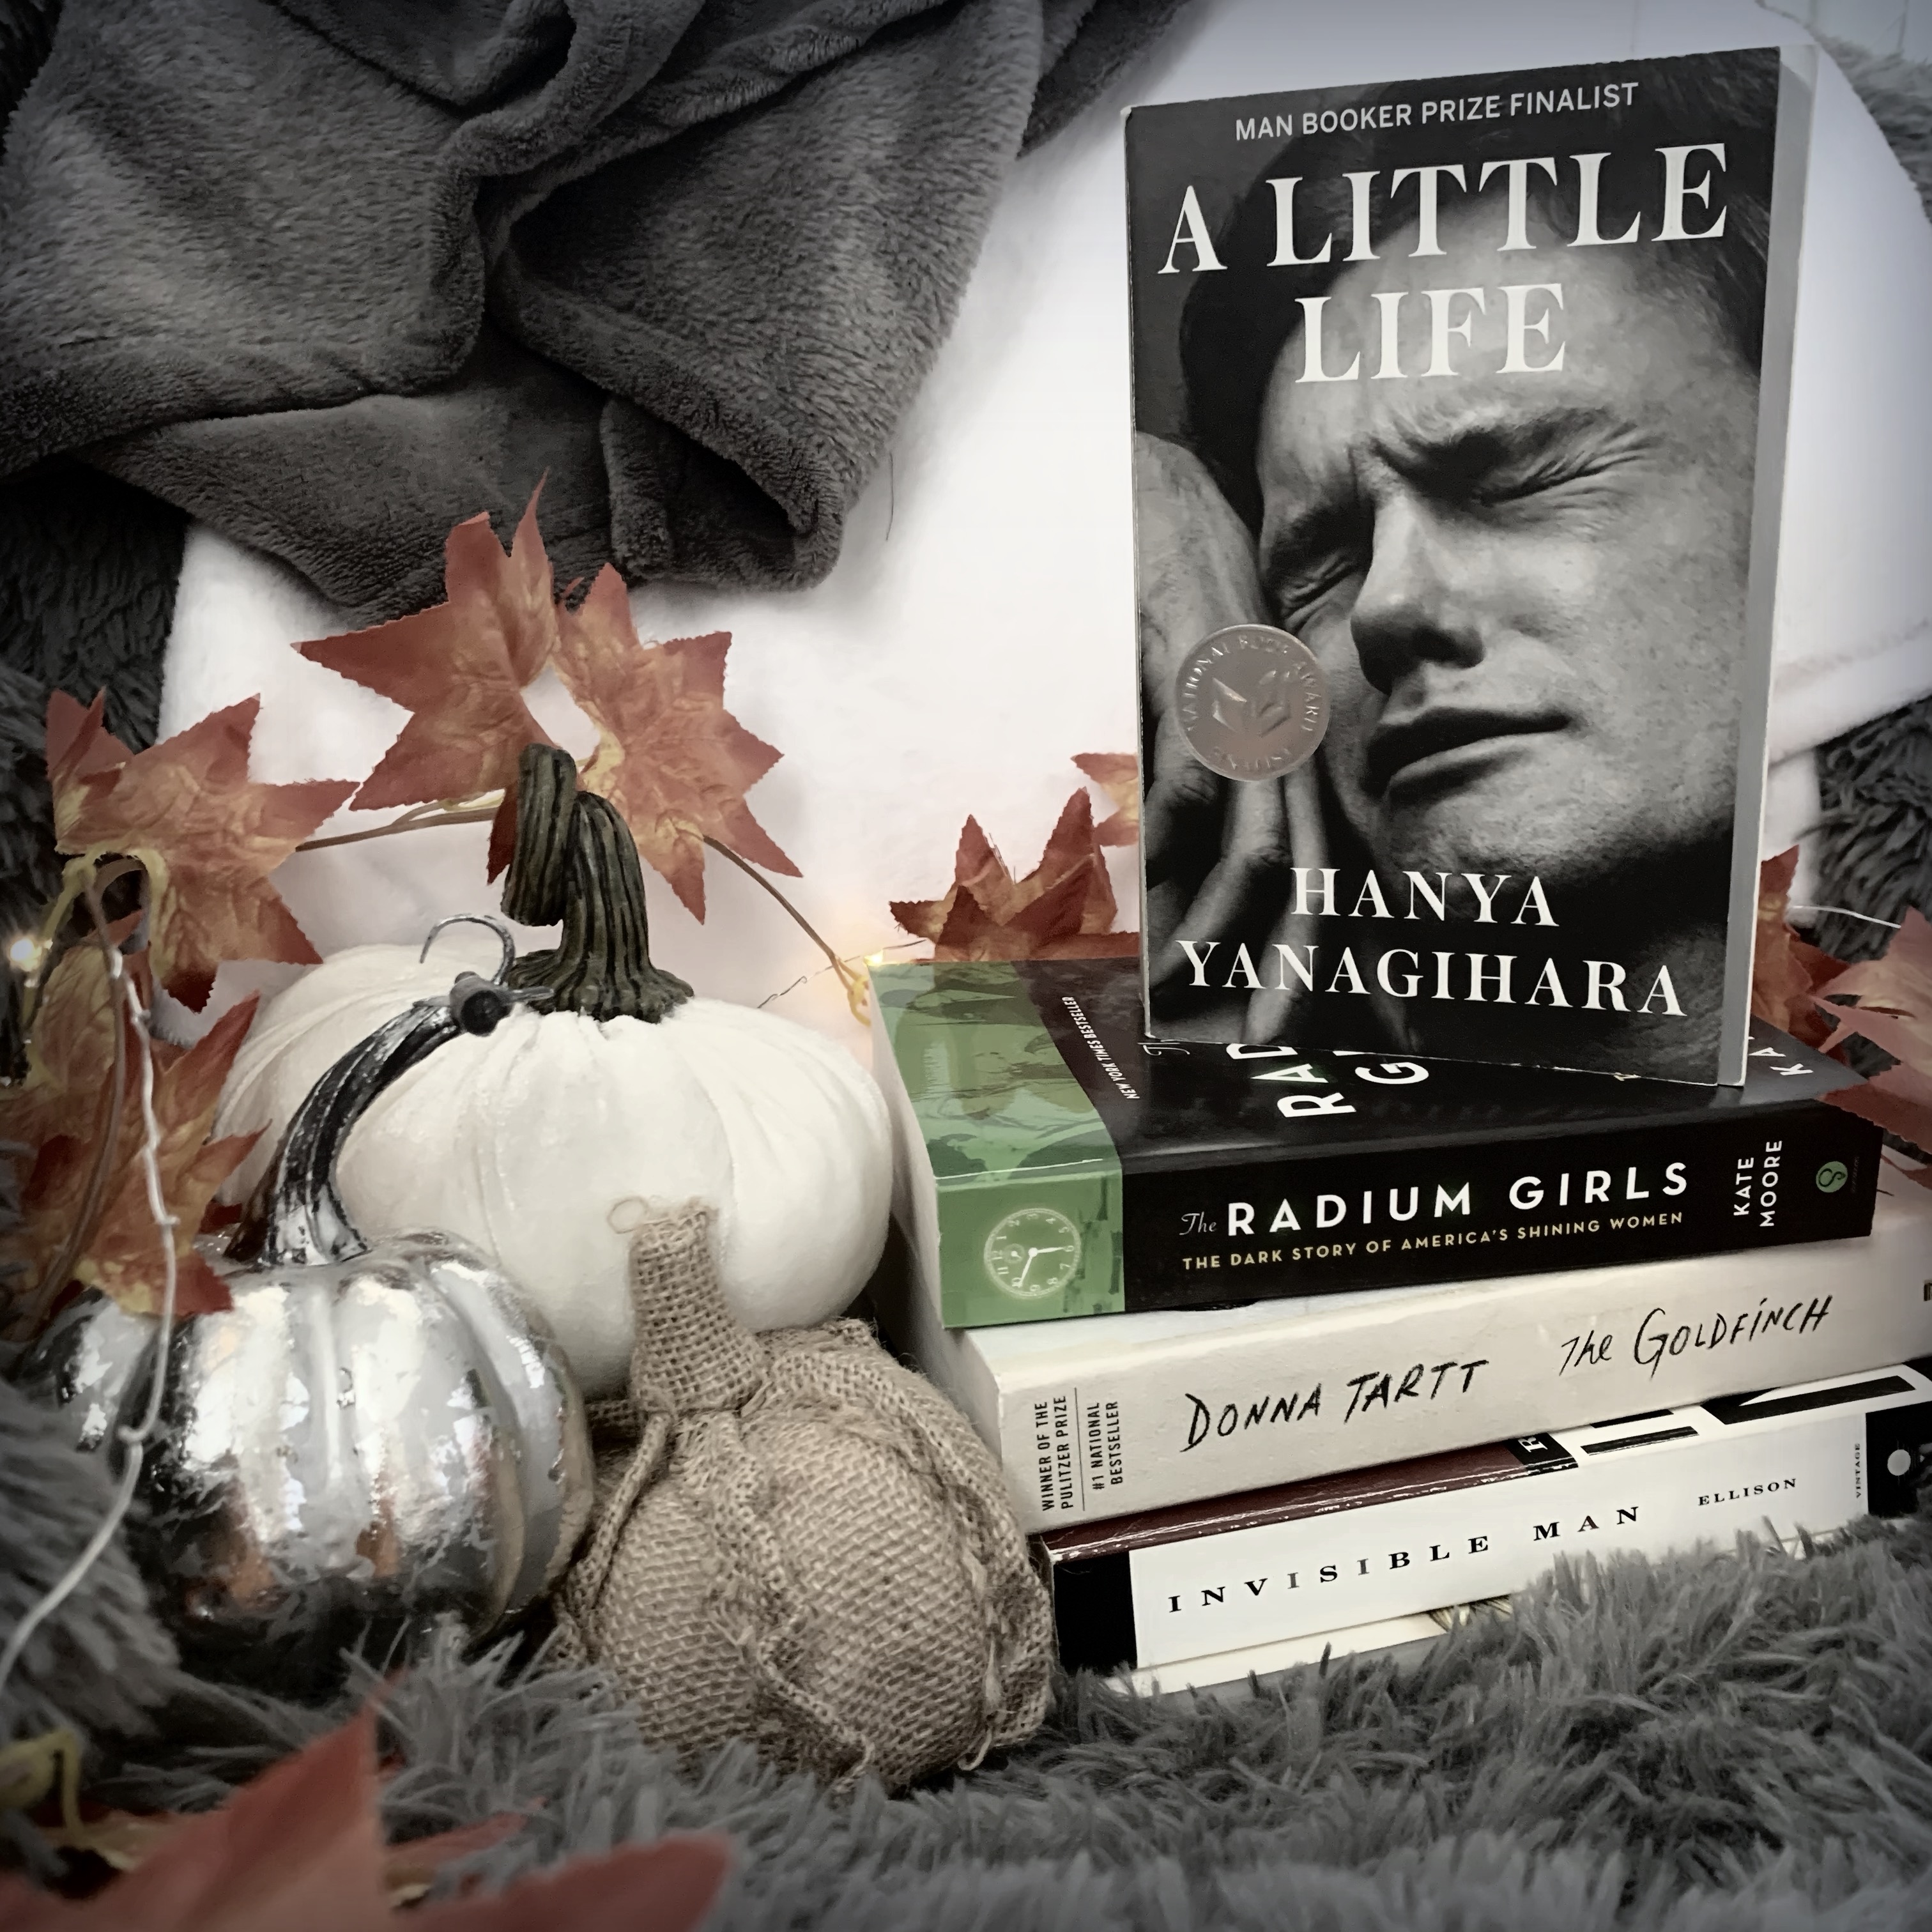 the little life book review